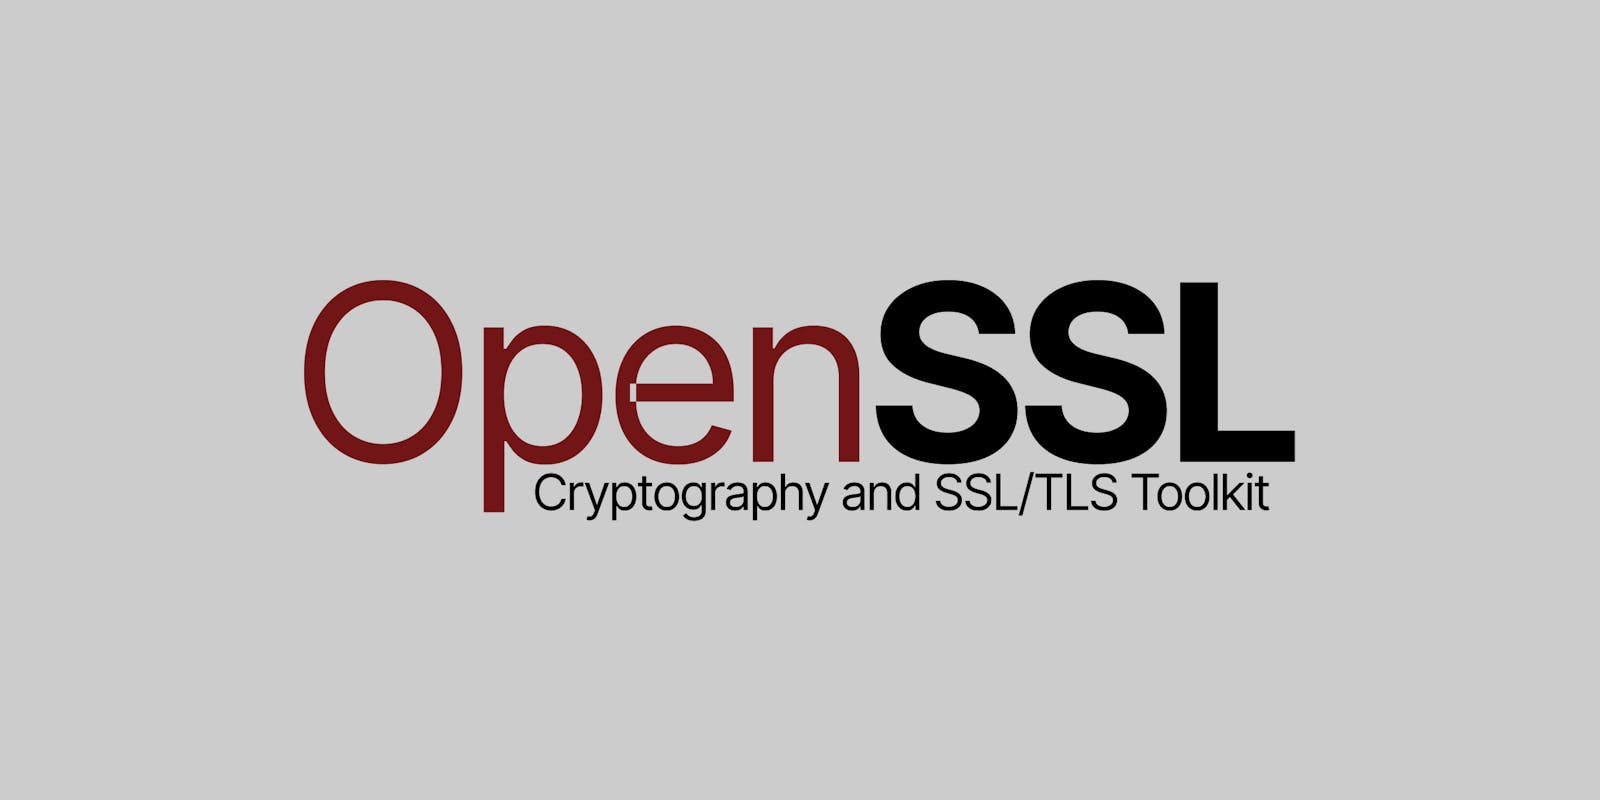 Creating self-signed certificates using OpenSSL